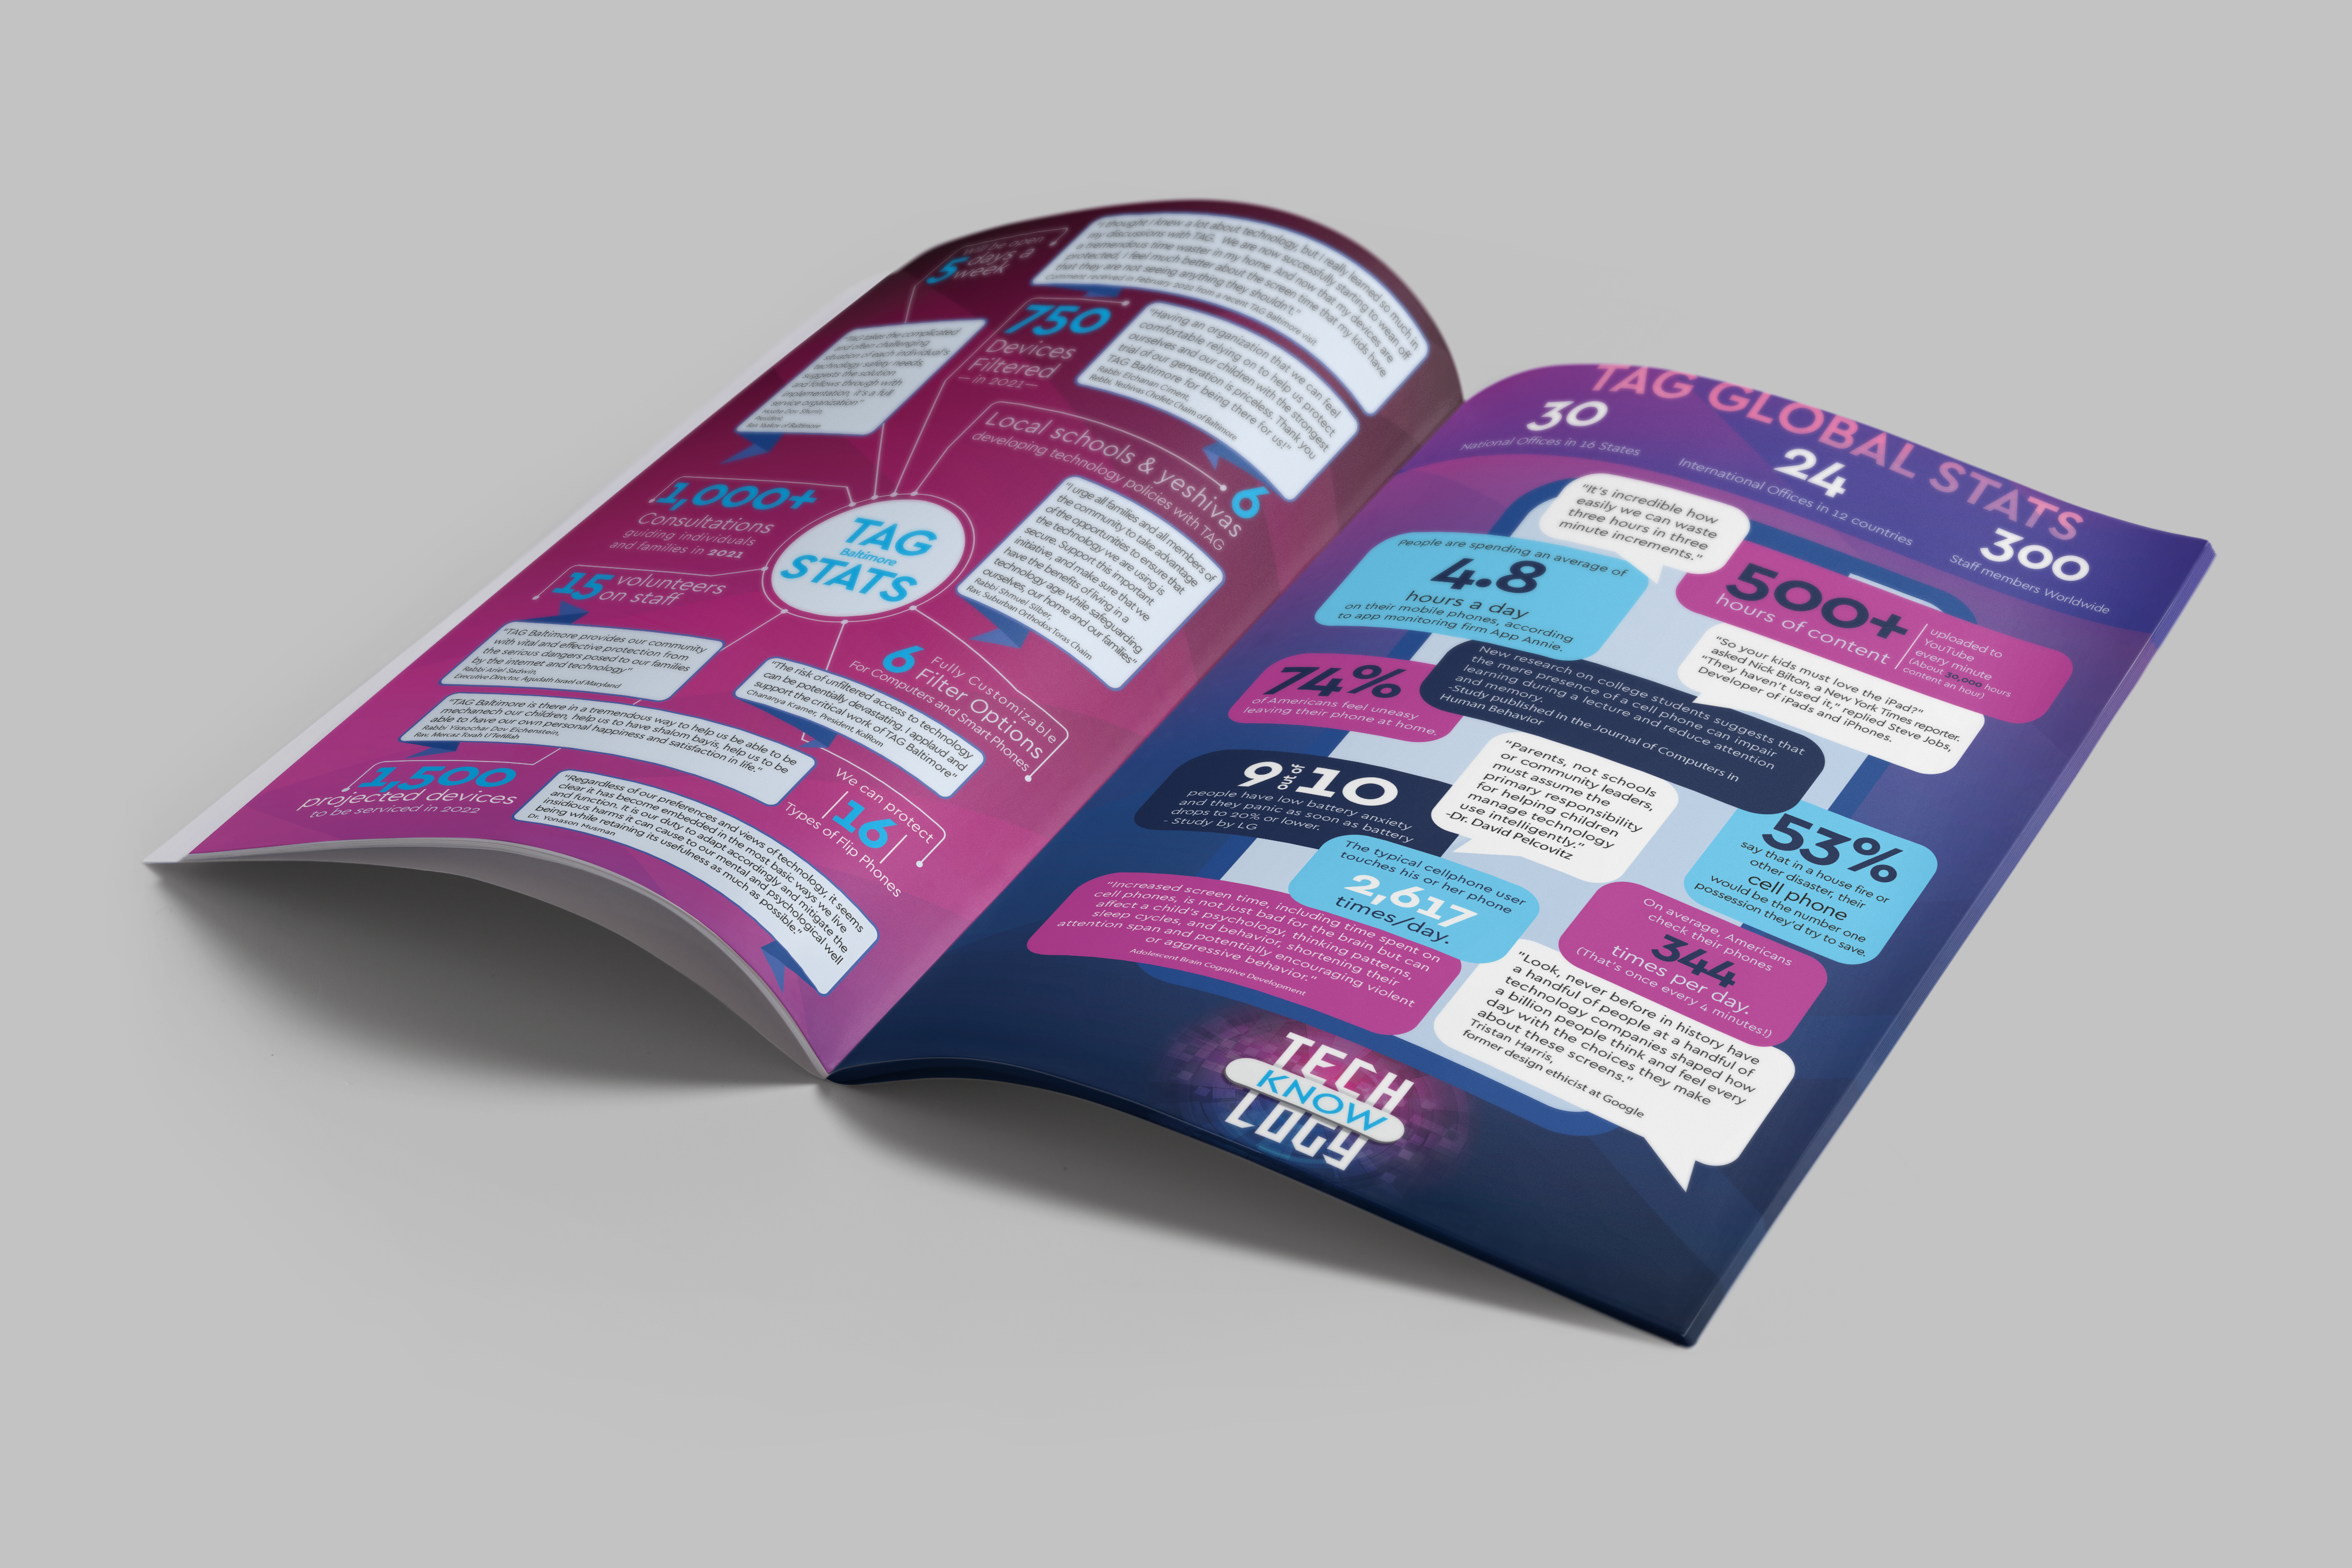 Tag TechKNOWlogy campaign brochure